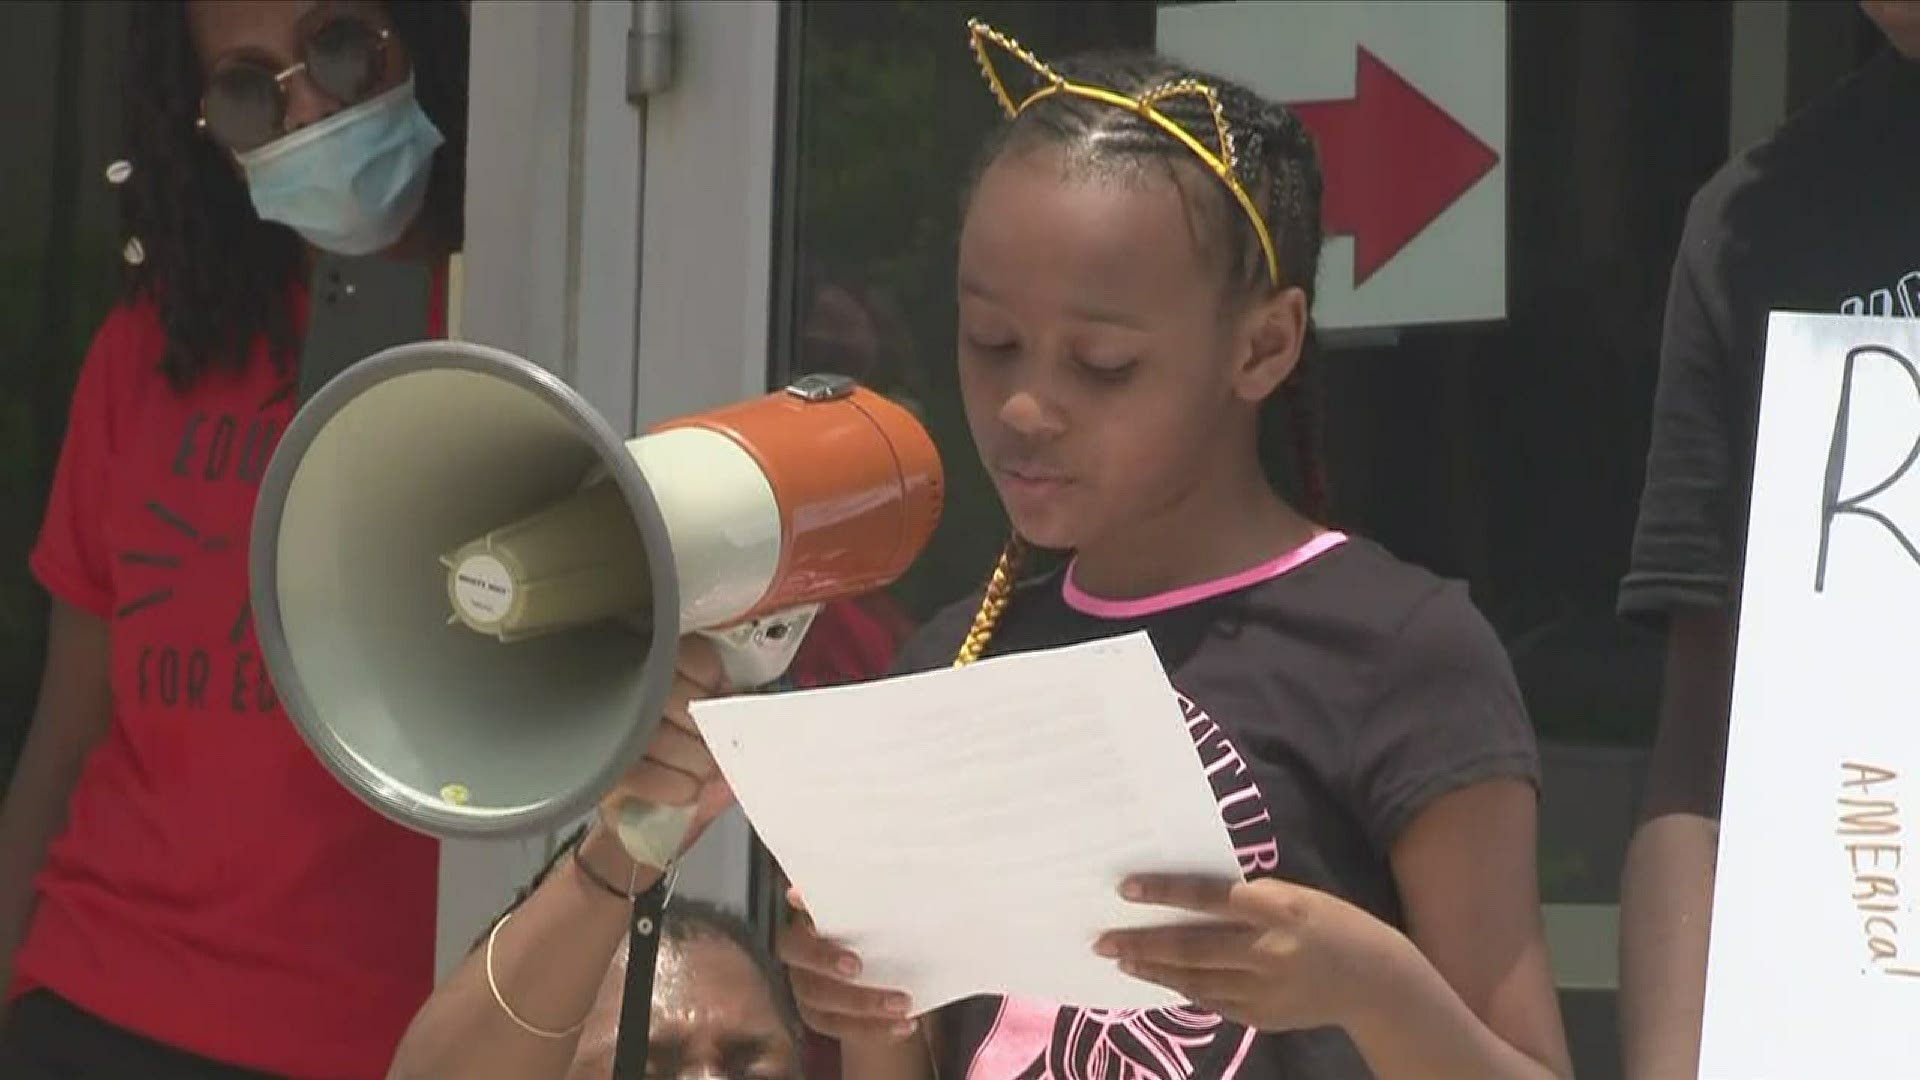 Gracie recites poems about the experience of Black students in the classroom at a Juneteenth rally in Washington, D.C.